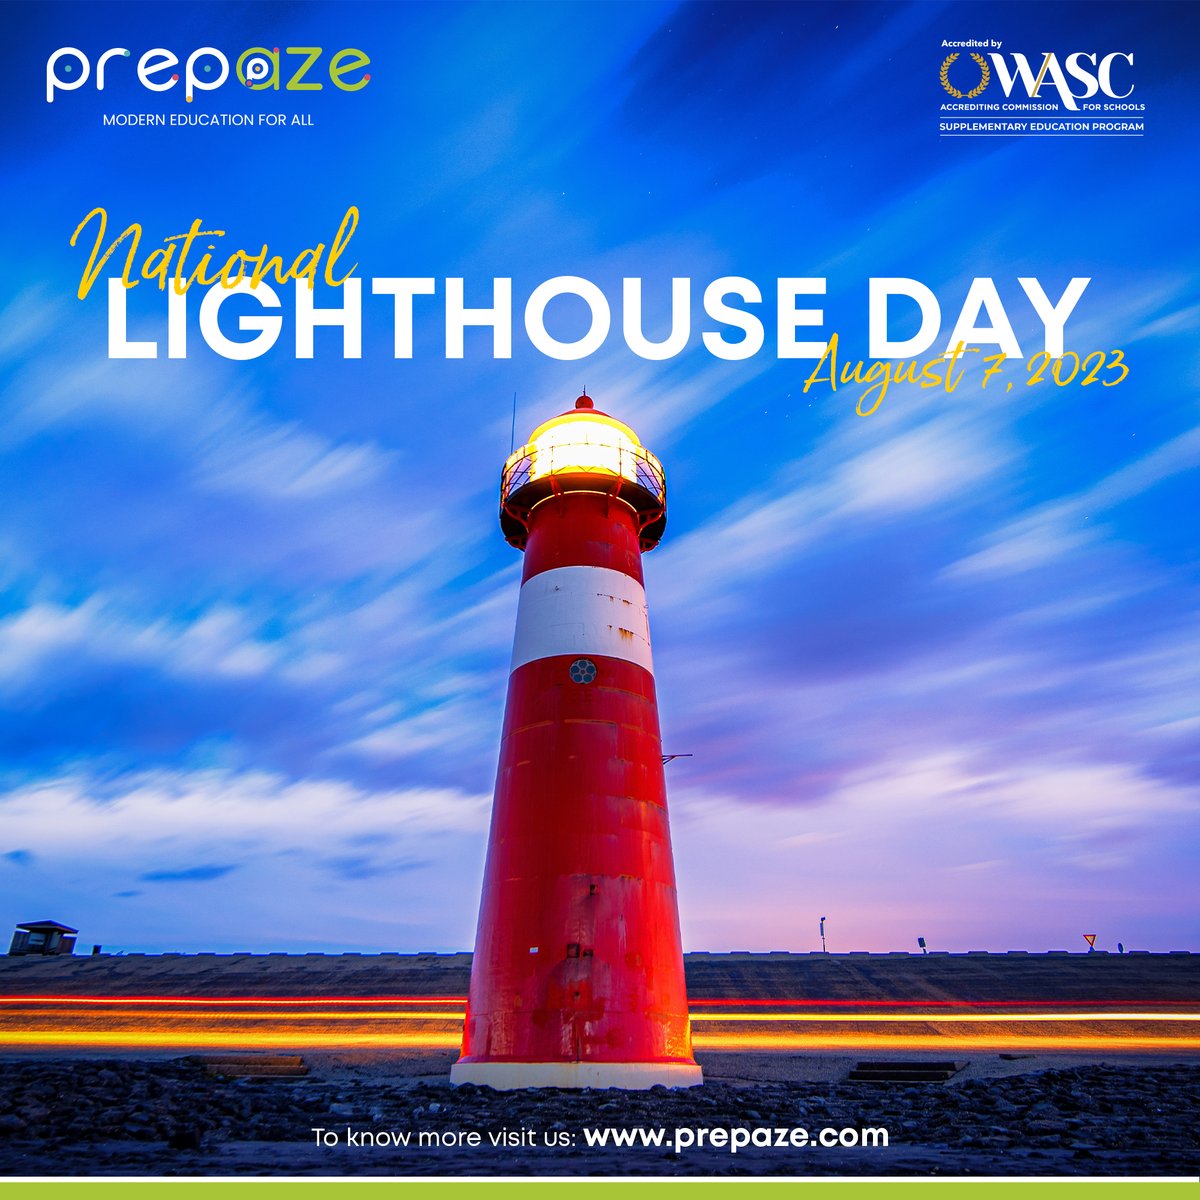 🏫✨ Happy Nation Lighthouse Day! 🎓
Today, we celebrate the importance of education as a guiding beacon in every student's life. Let's empower minds and light up futures together!
#NationLighthouseDay #EmpowerMinds #IlluminateFutures #prepaze